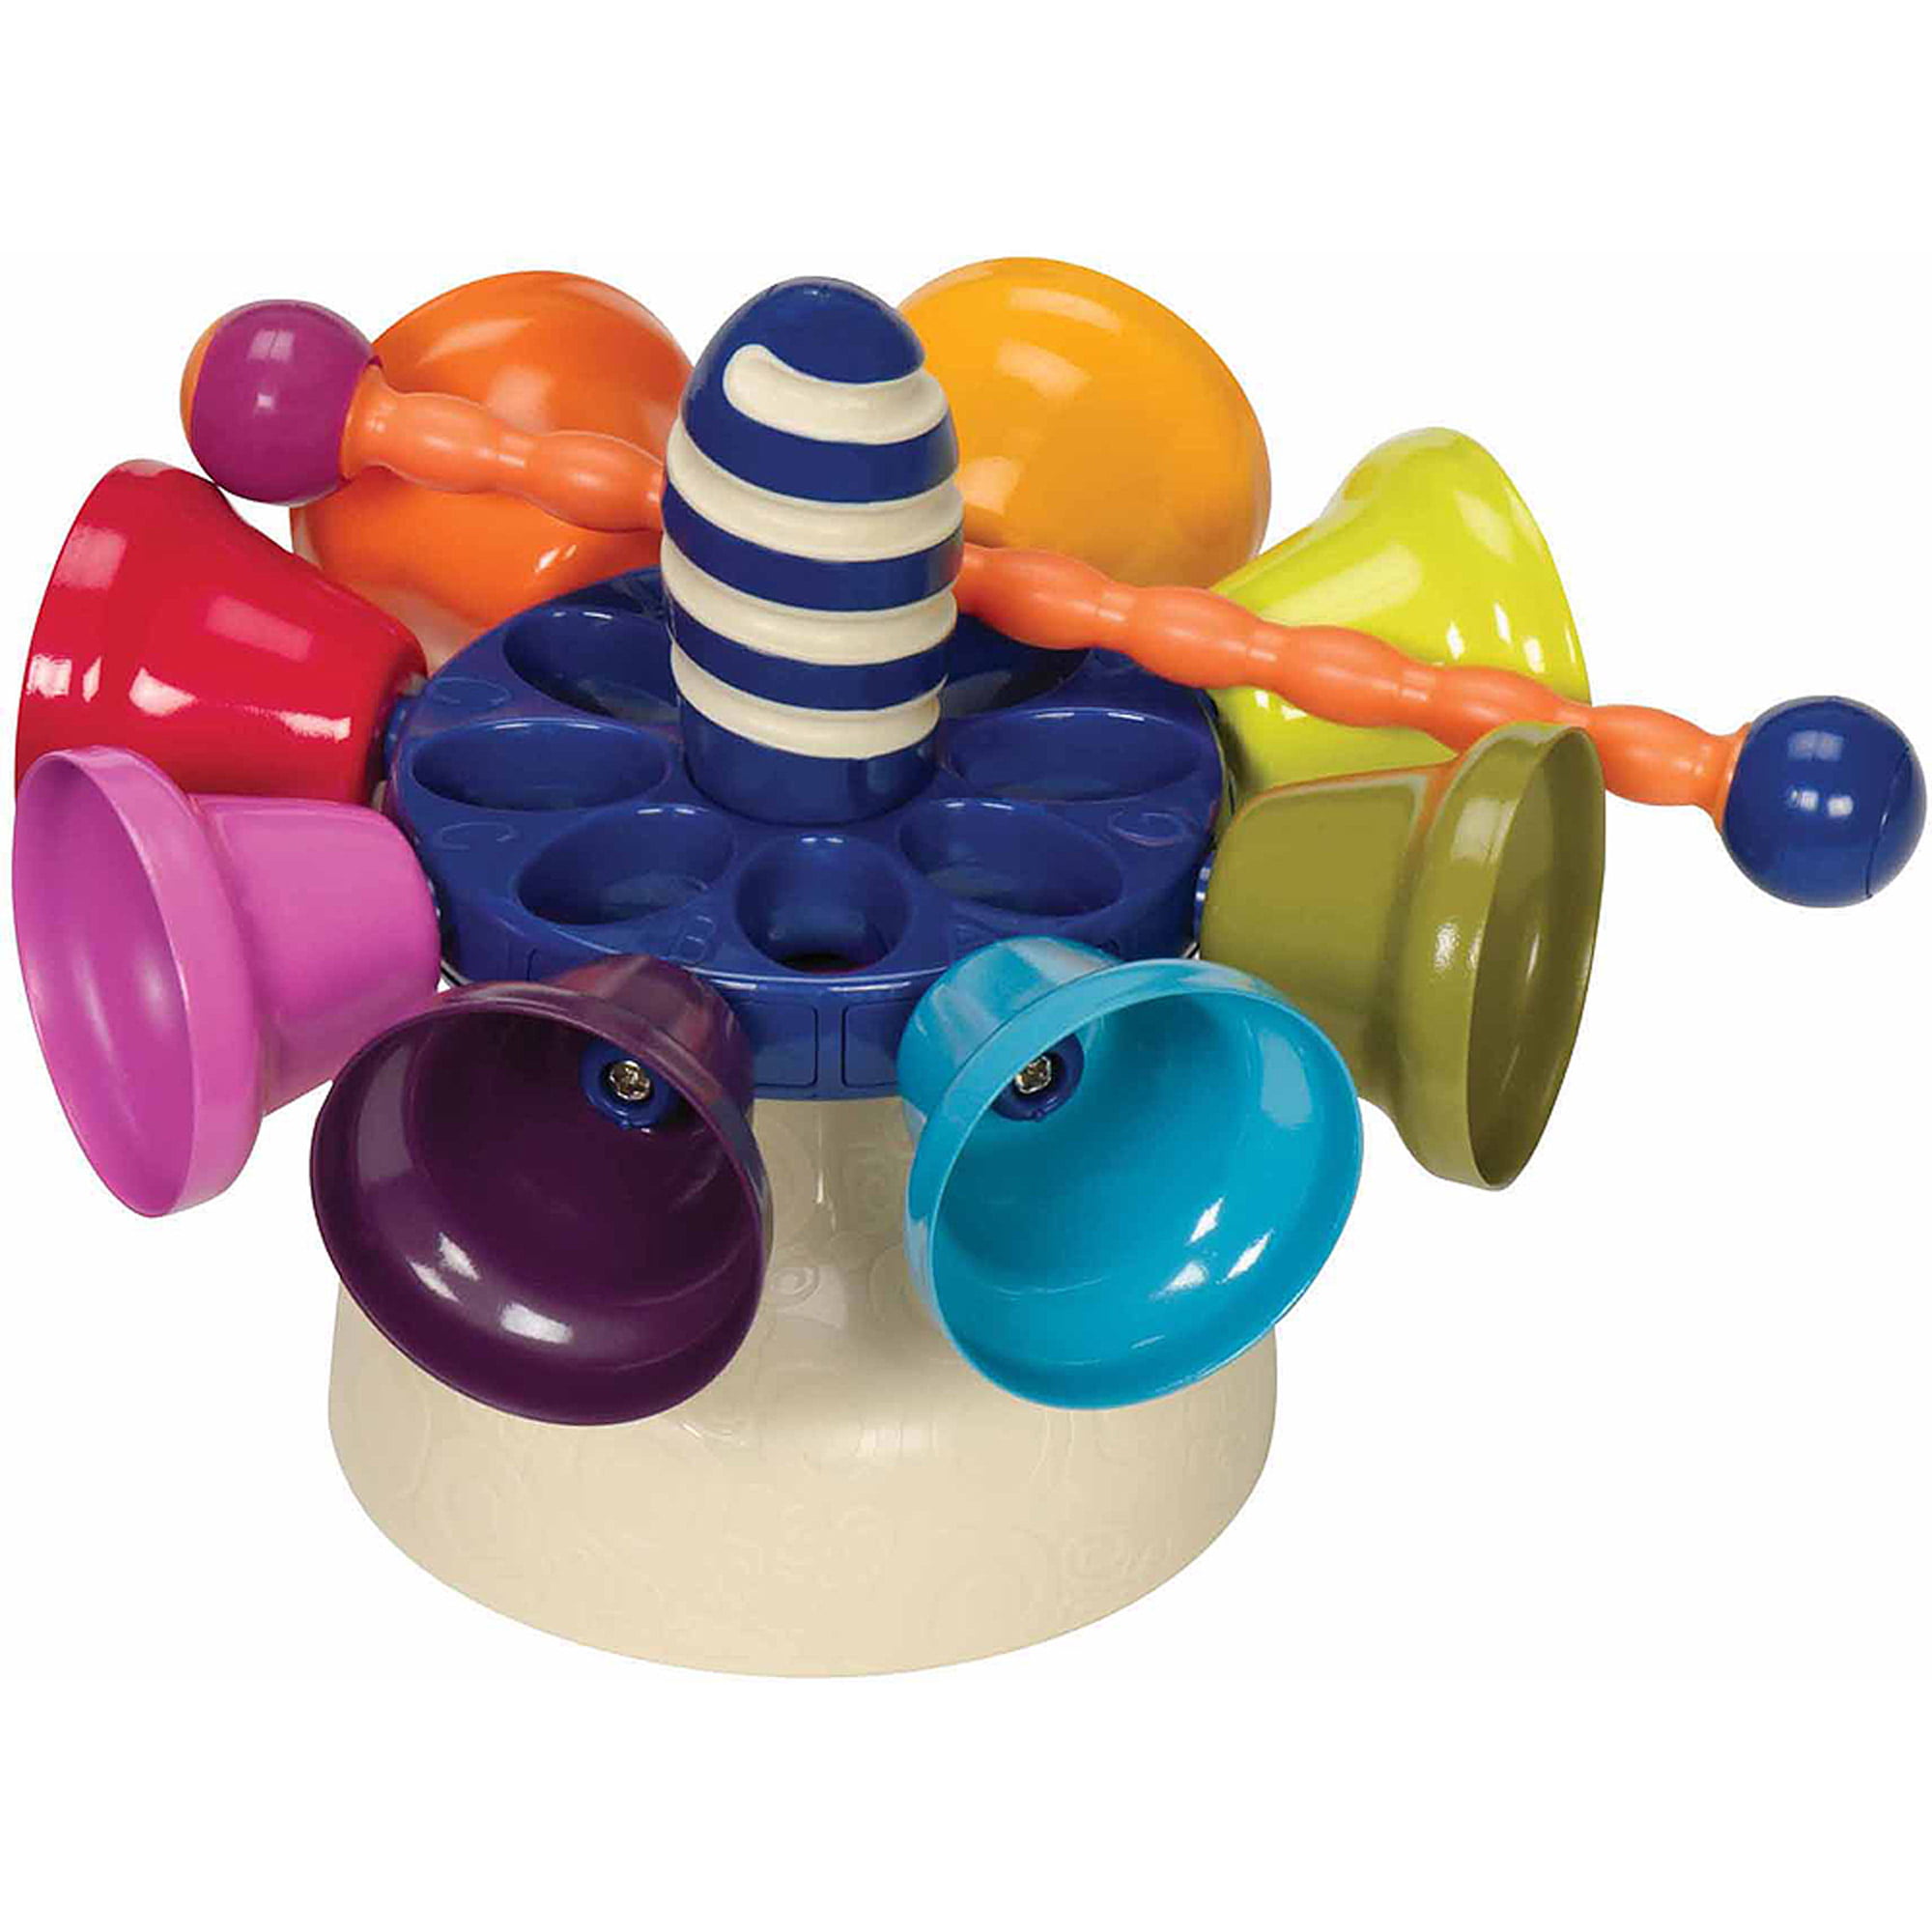 Toys Battat Piccolo Carousel Bells Kids Musical Instrument Hard to Find! Details about   B 